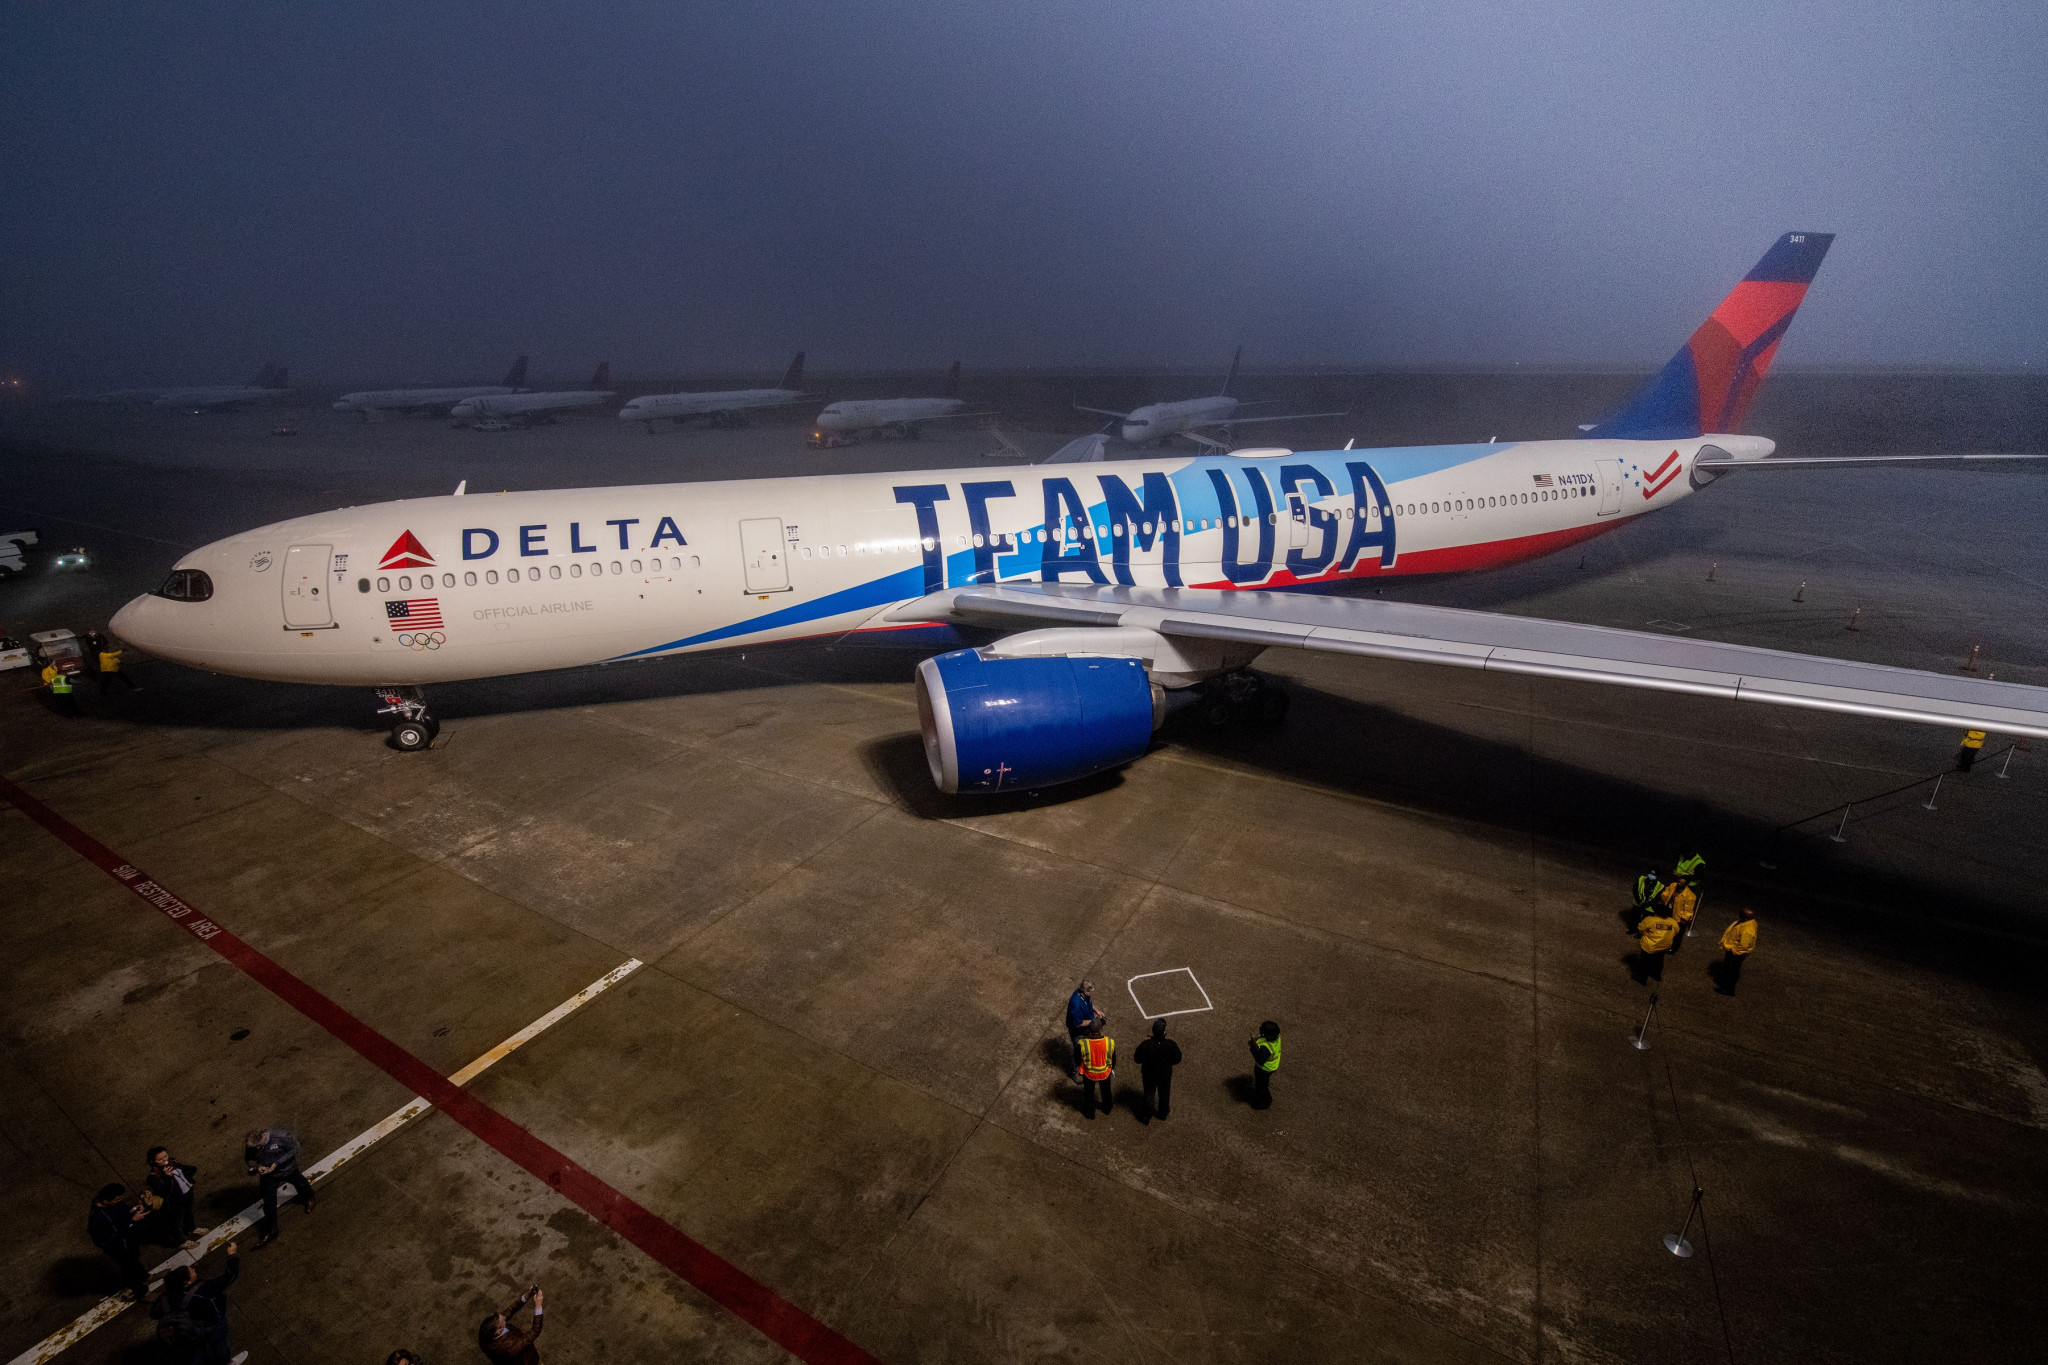 Delta Air Lines has unveiled a Team USA-inspired aircraft livery prior to Beijing 2022 ©Delta Air Lines